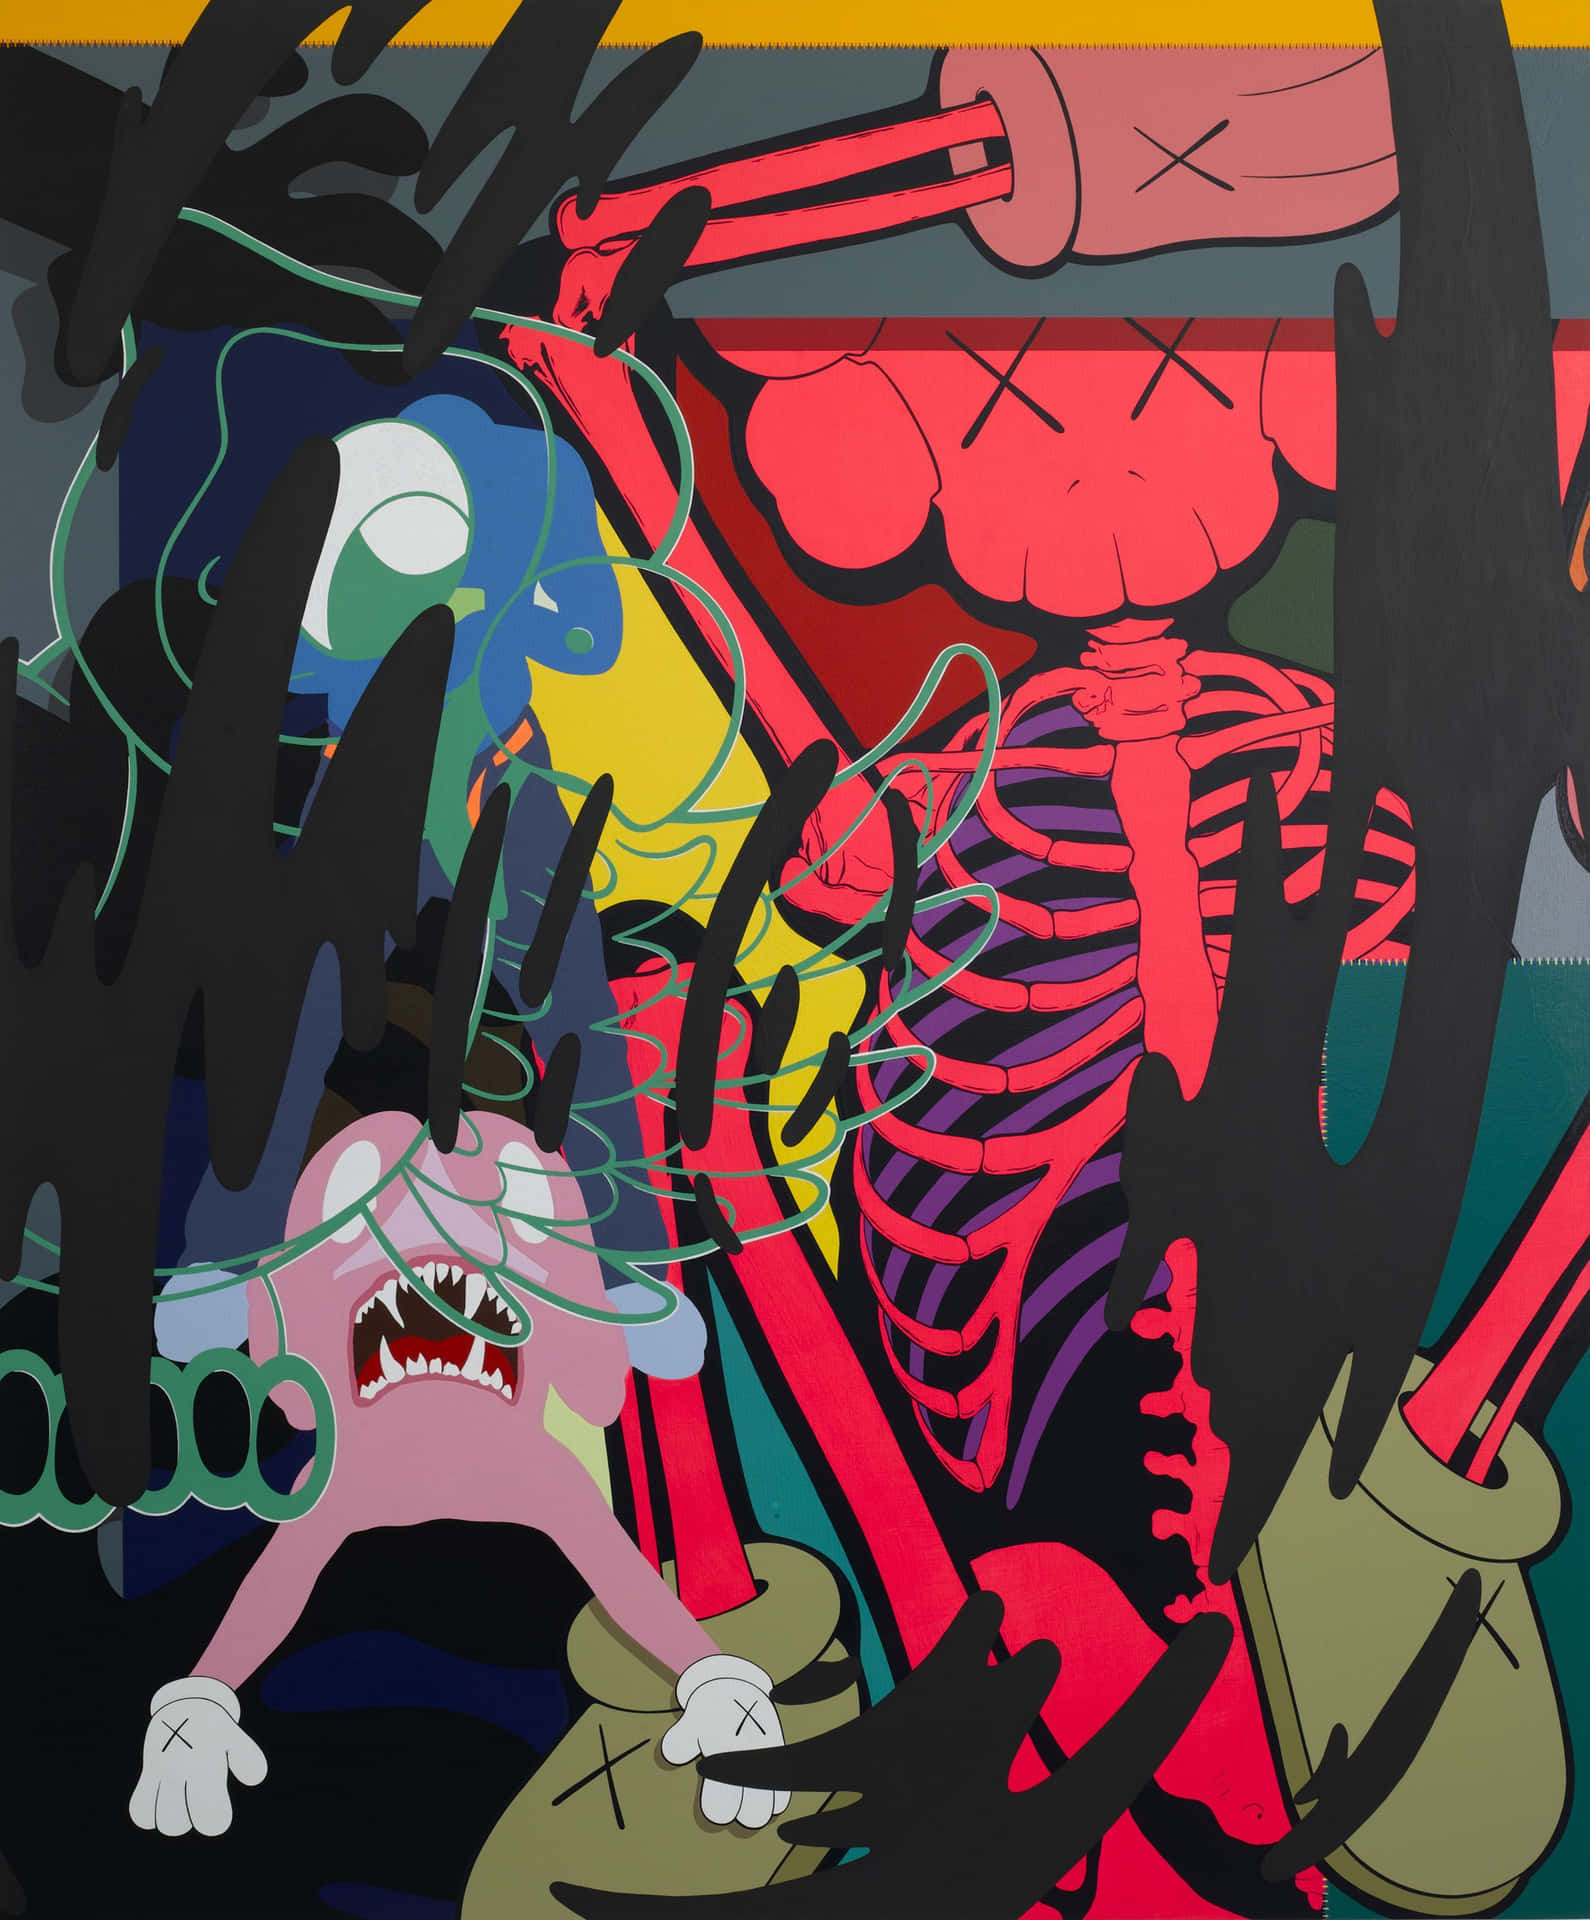 a painting with skeletons and other cartoon characters Wallpaper